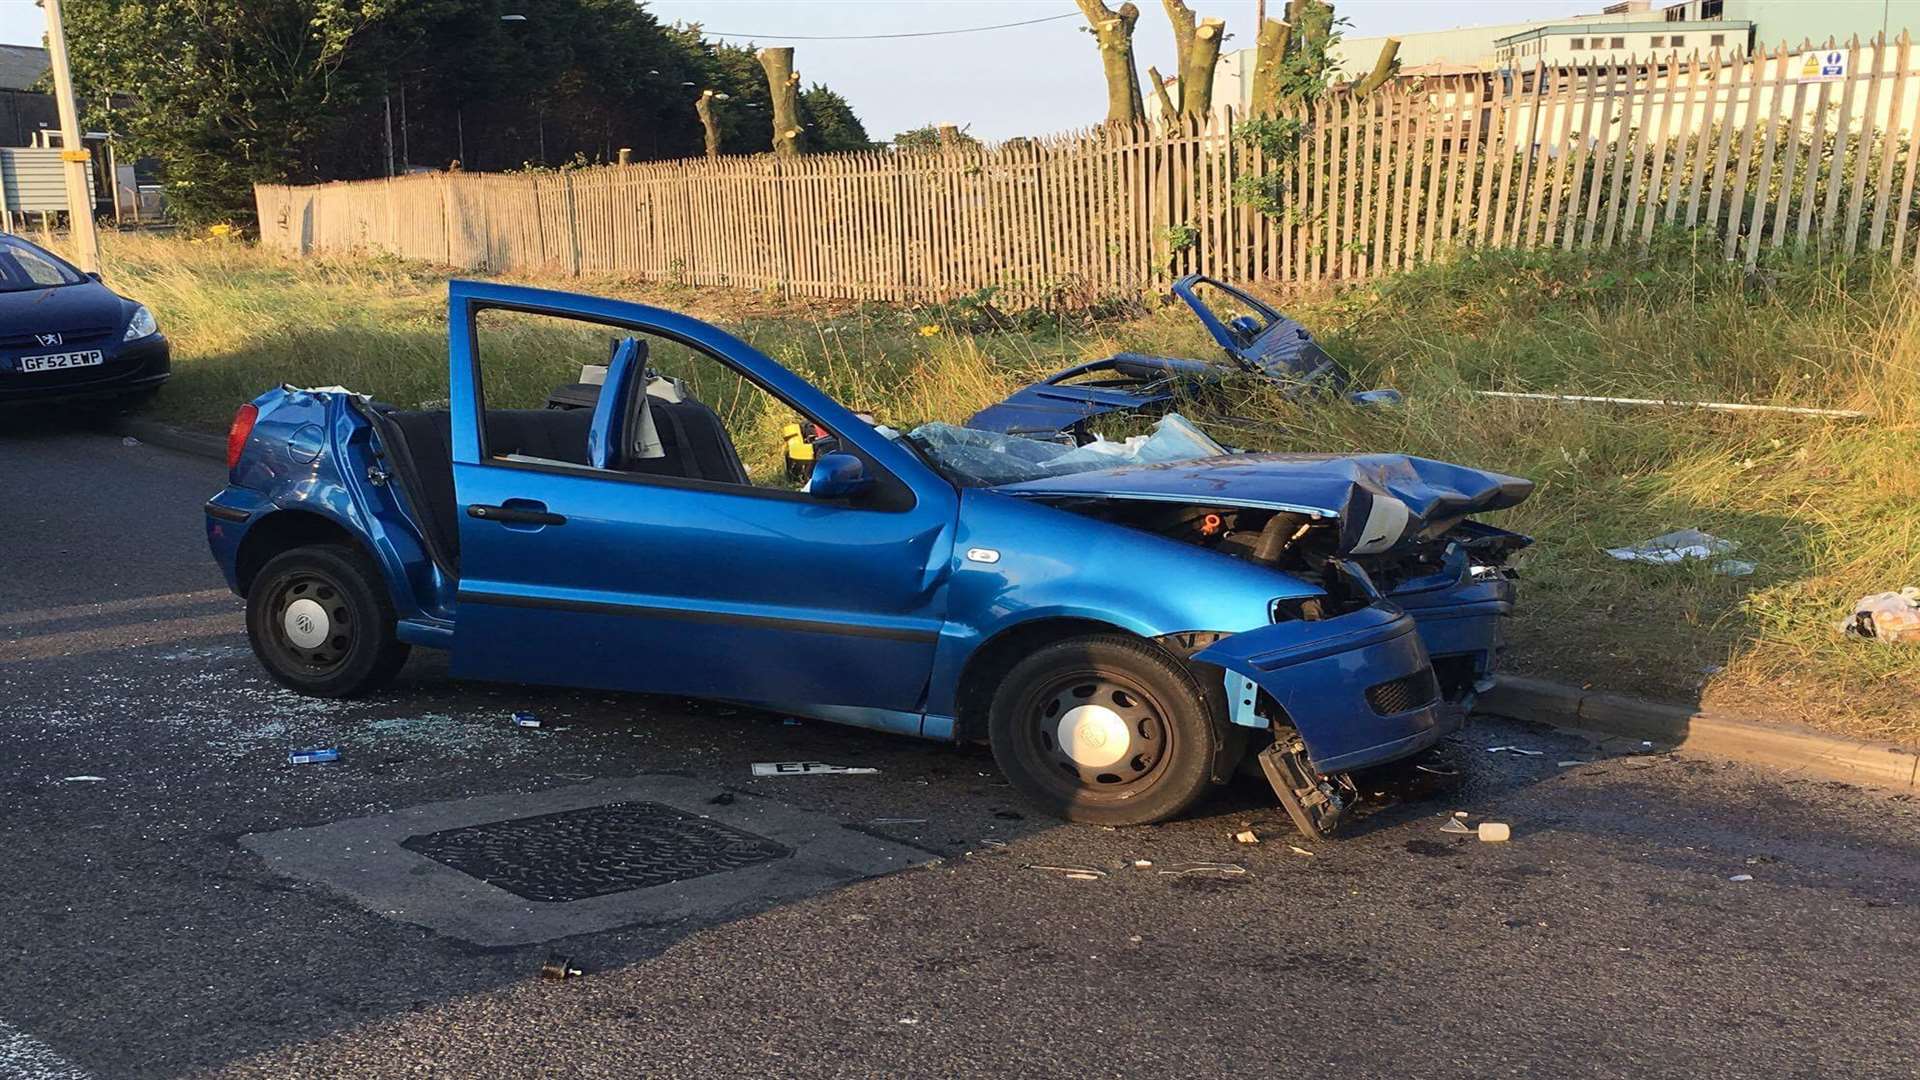 The remains of the VW Polo